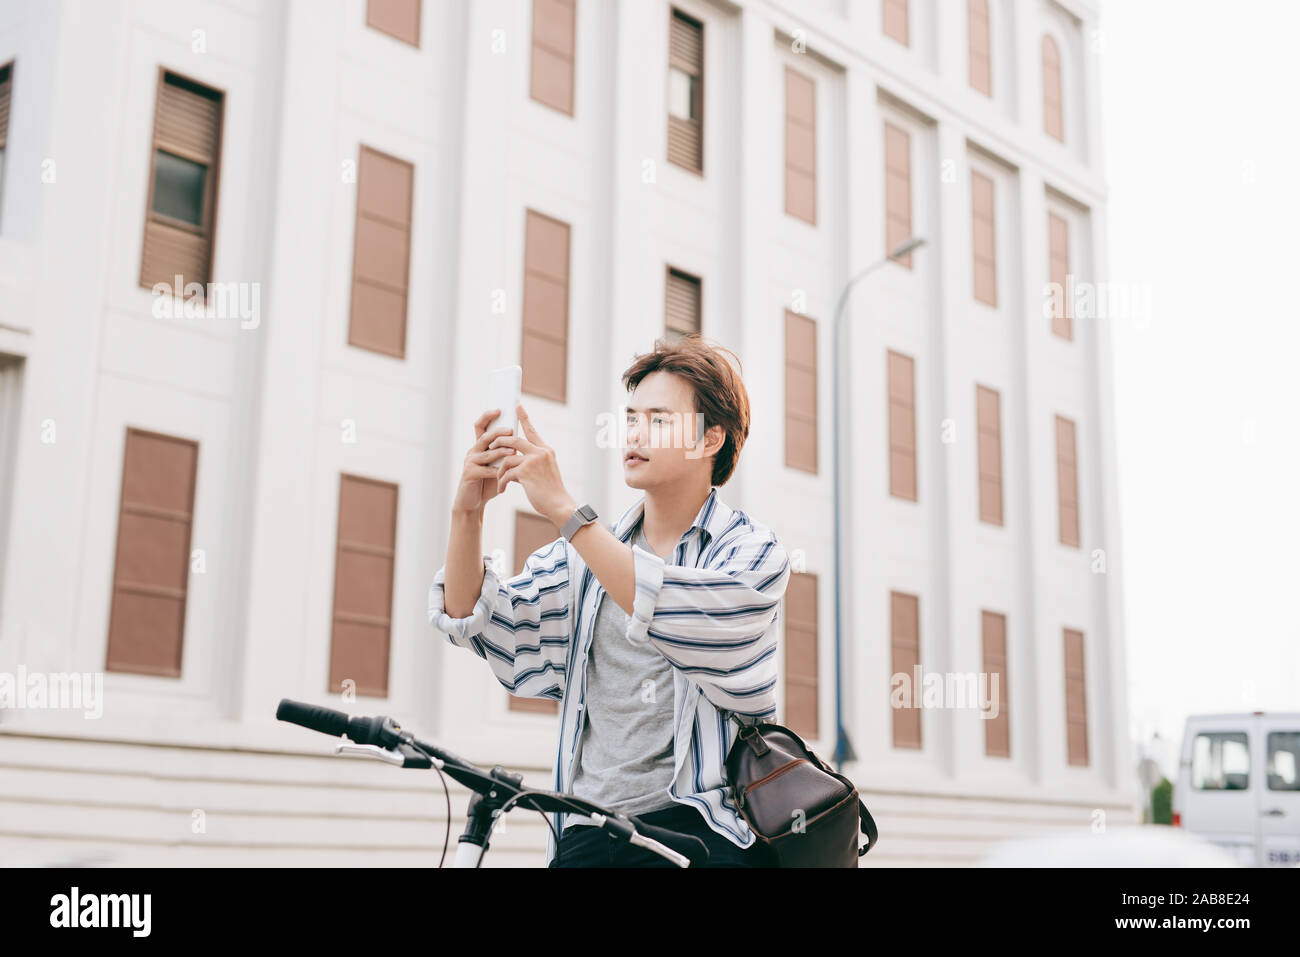 Stylish man chatting while using mobile phone while sitting on bicycle, outdoors. Dressed up in plaid shirt, t-shirt and jeans. Close-up. Stock Photo